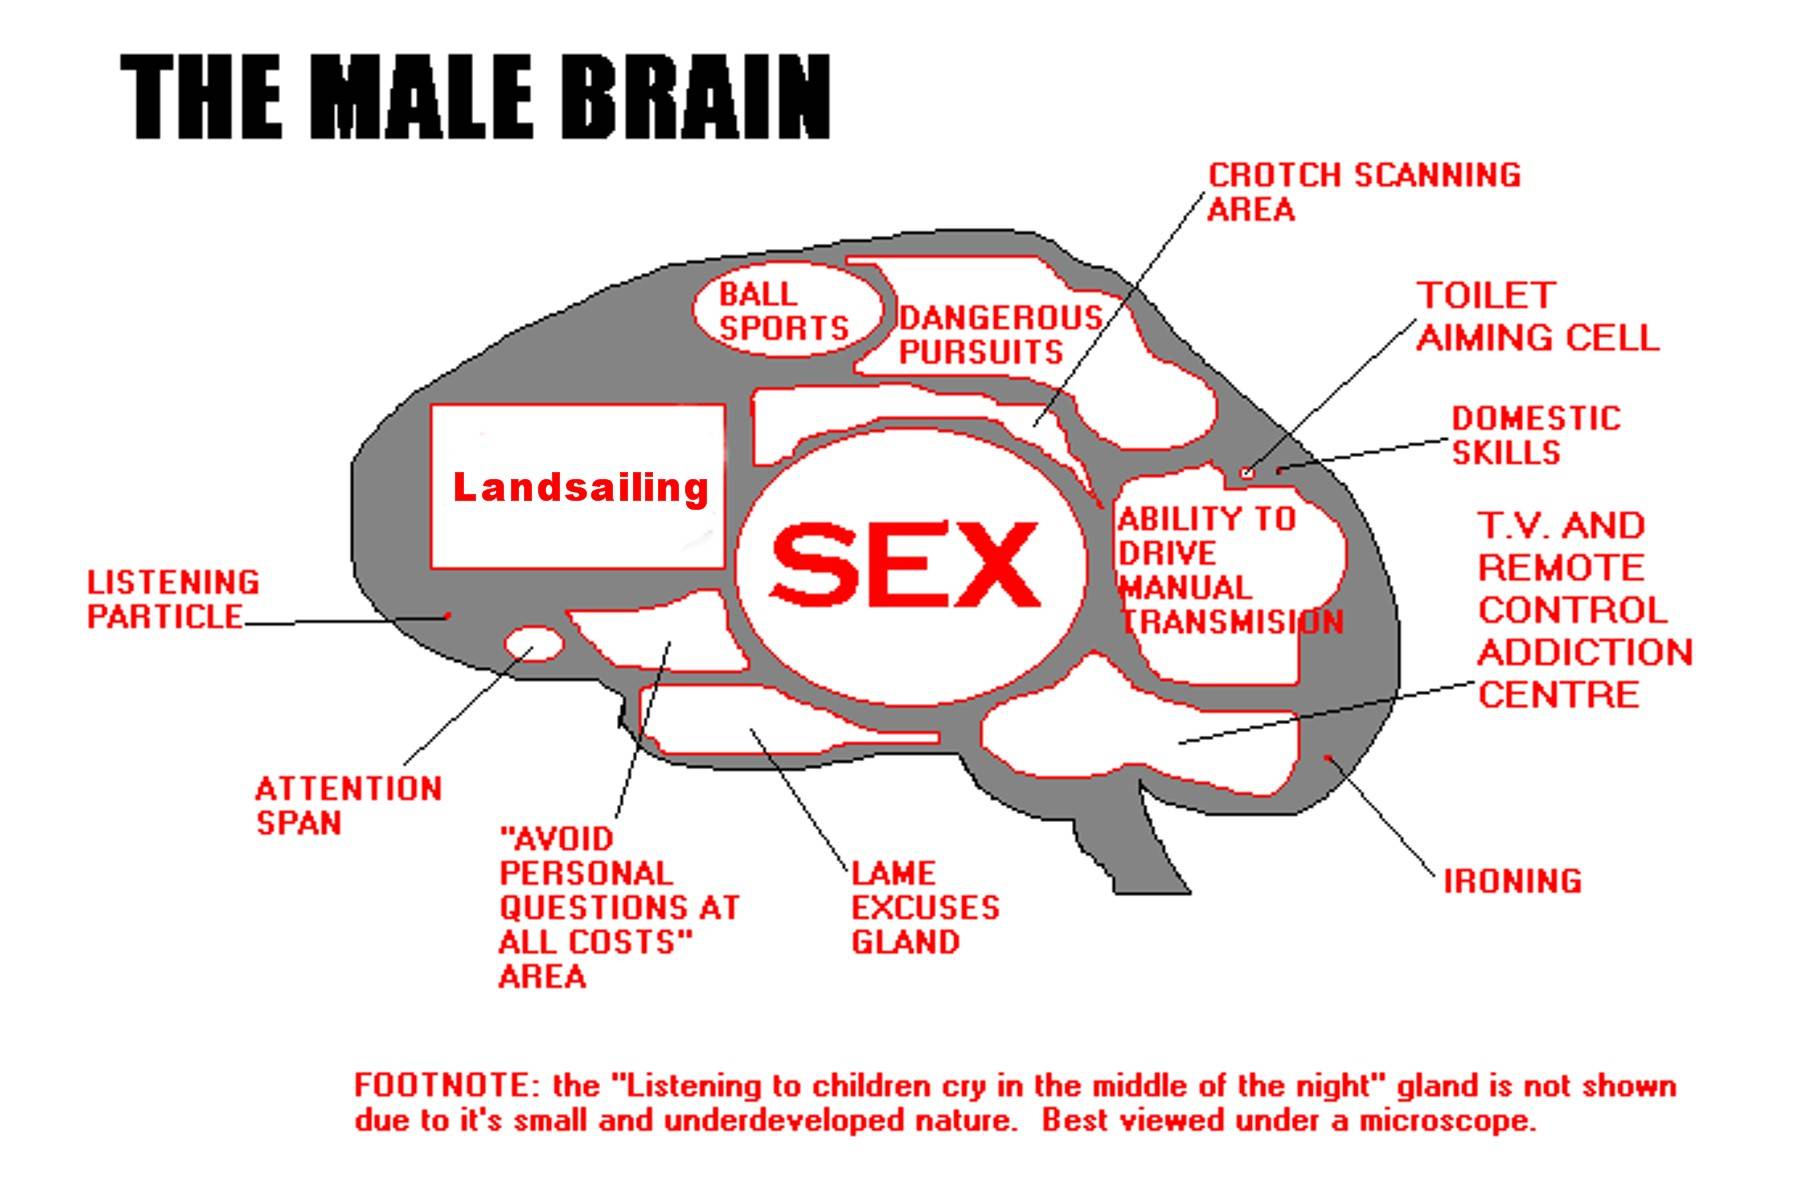 Areas Of Brain Activation In Males And Females During